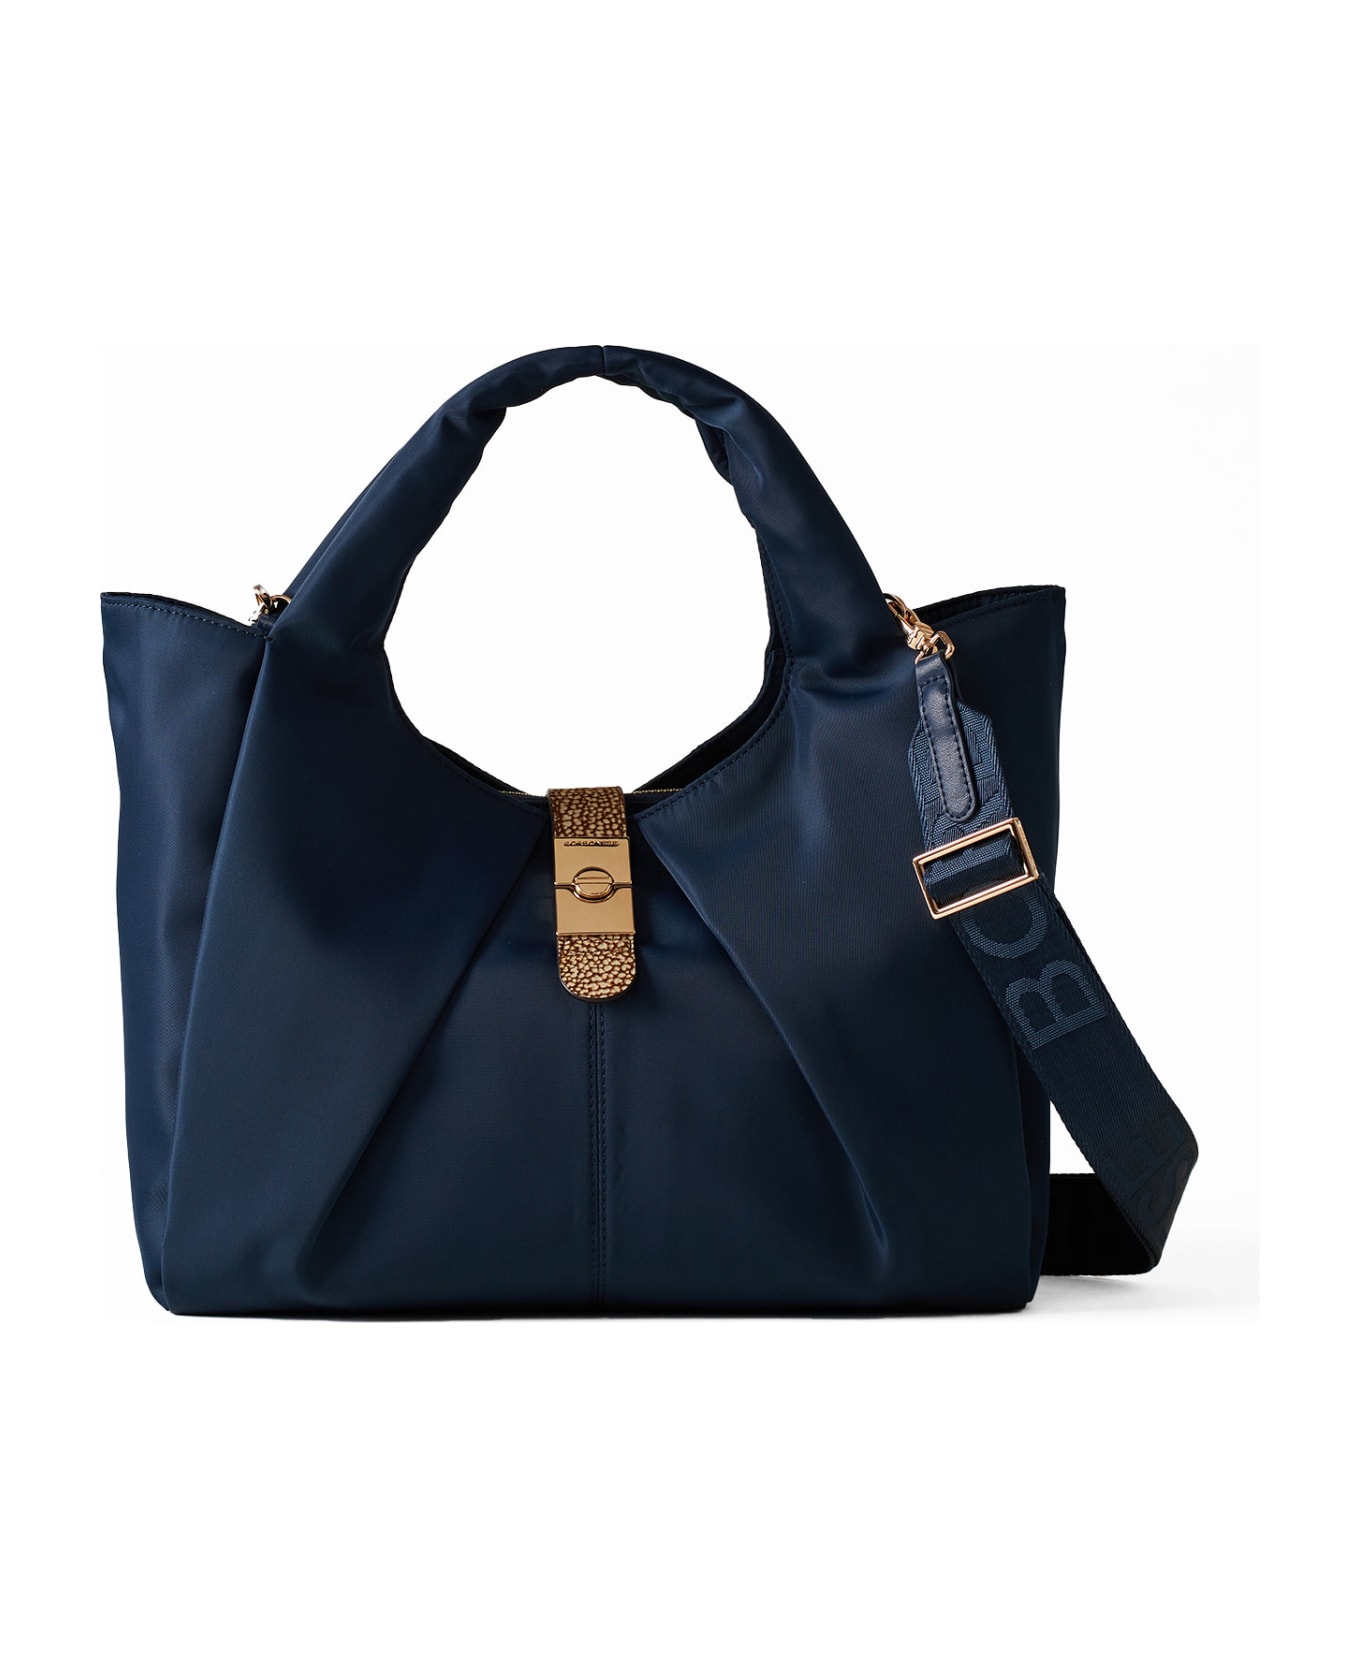 Borbonese Fabric And Leather Handbag With Shoulder Strap - BLU PRUSSIA/OP NAURALE